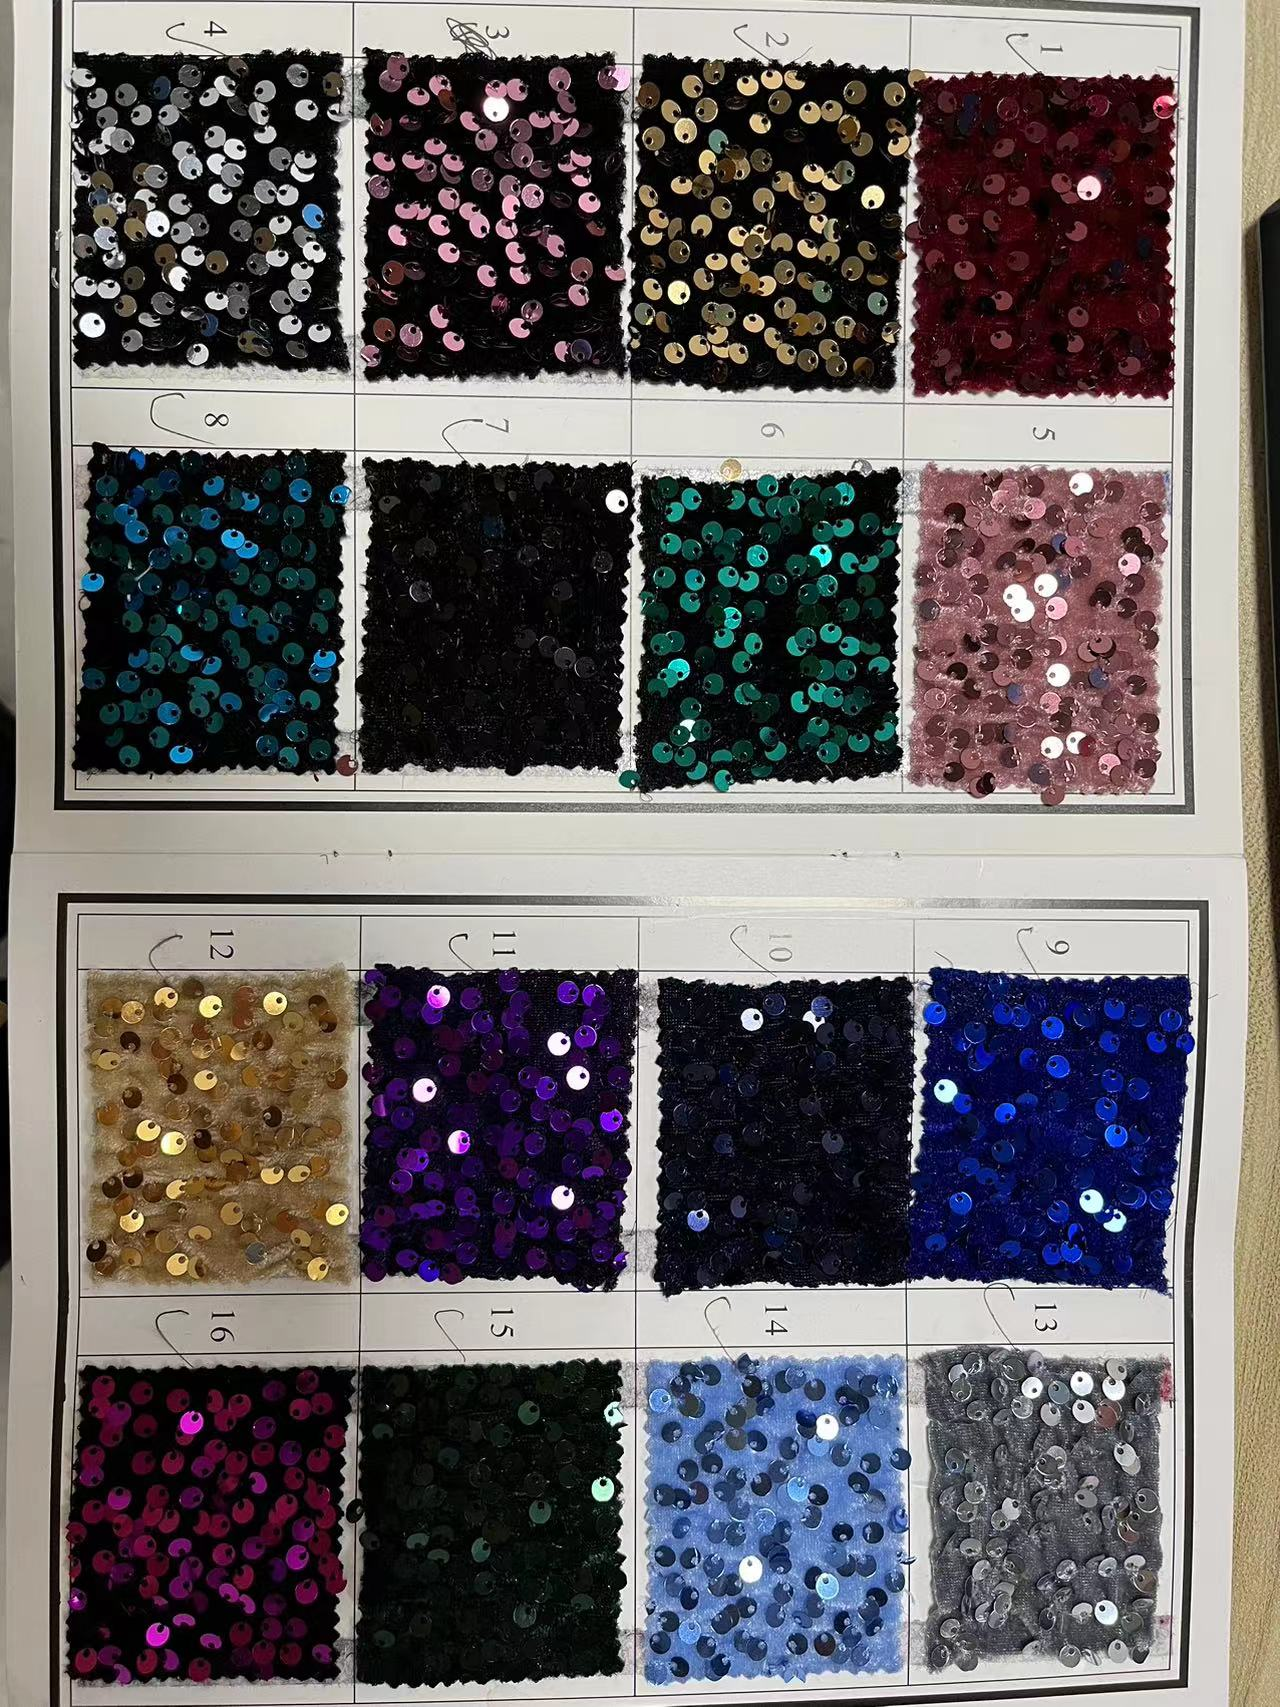 Sequin Fabric Swatches